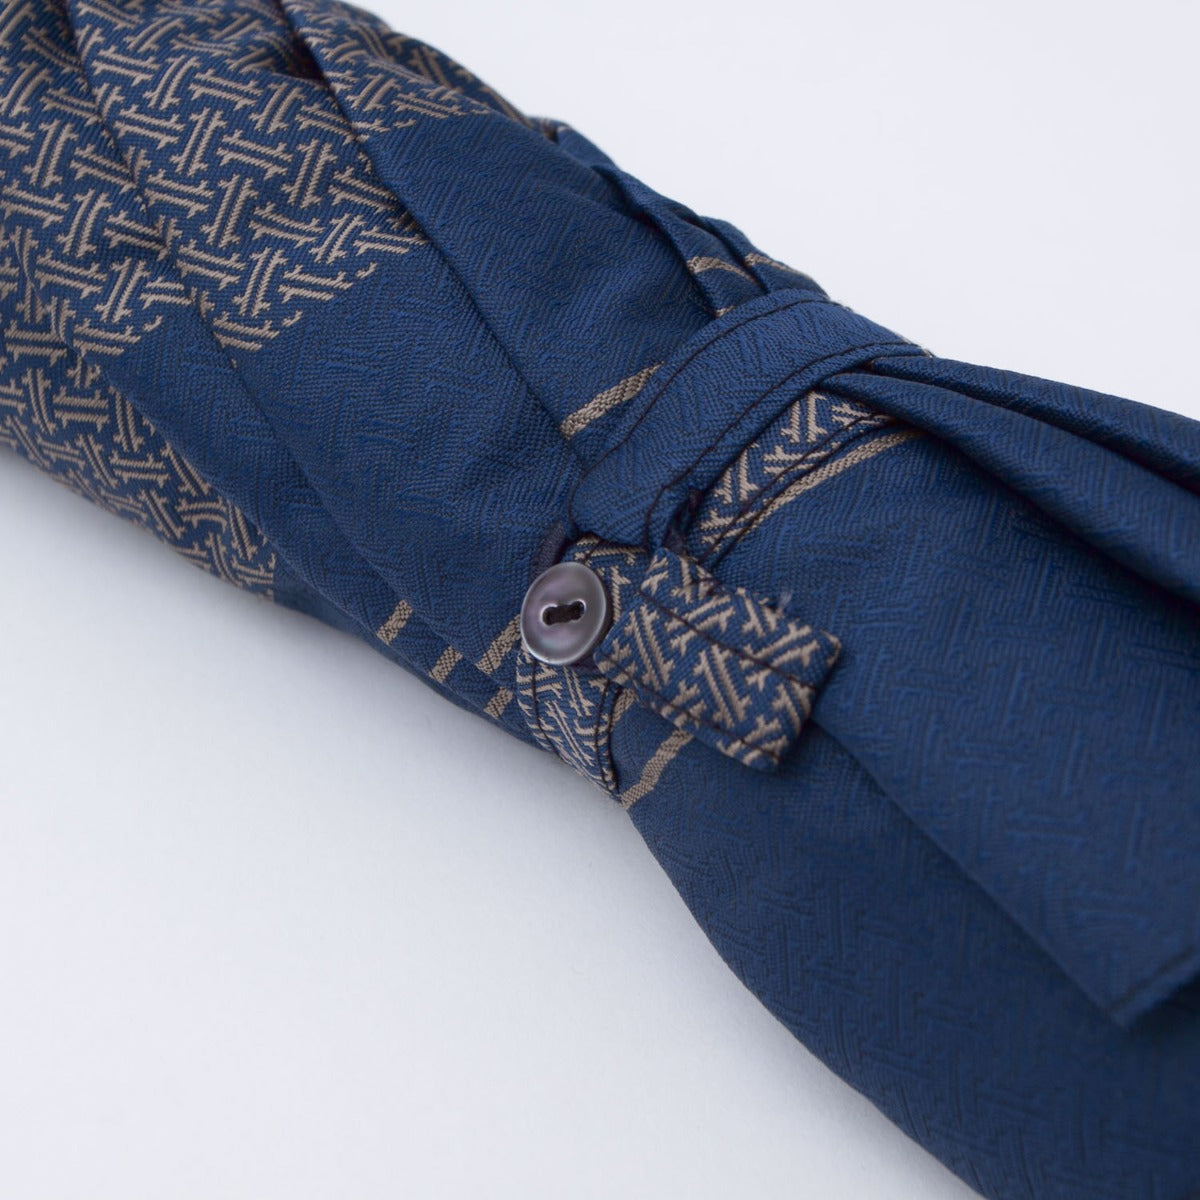 Patterned Navy Travel Umbrella with Leather Handle